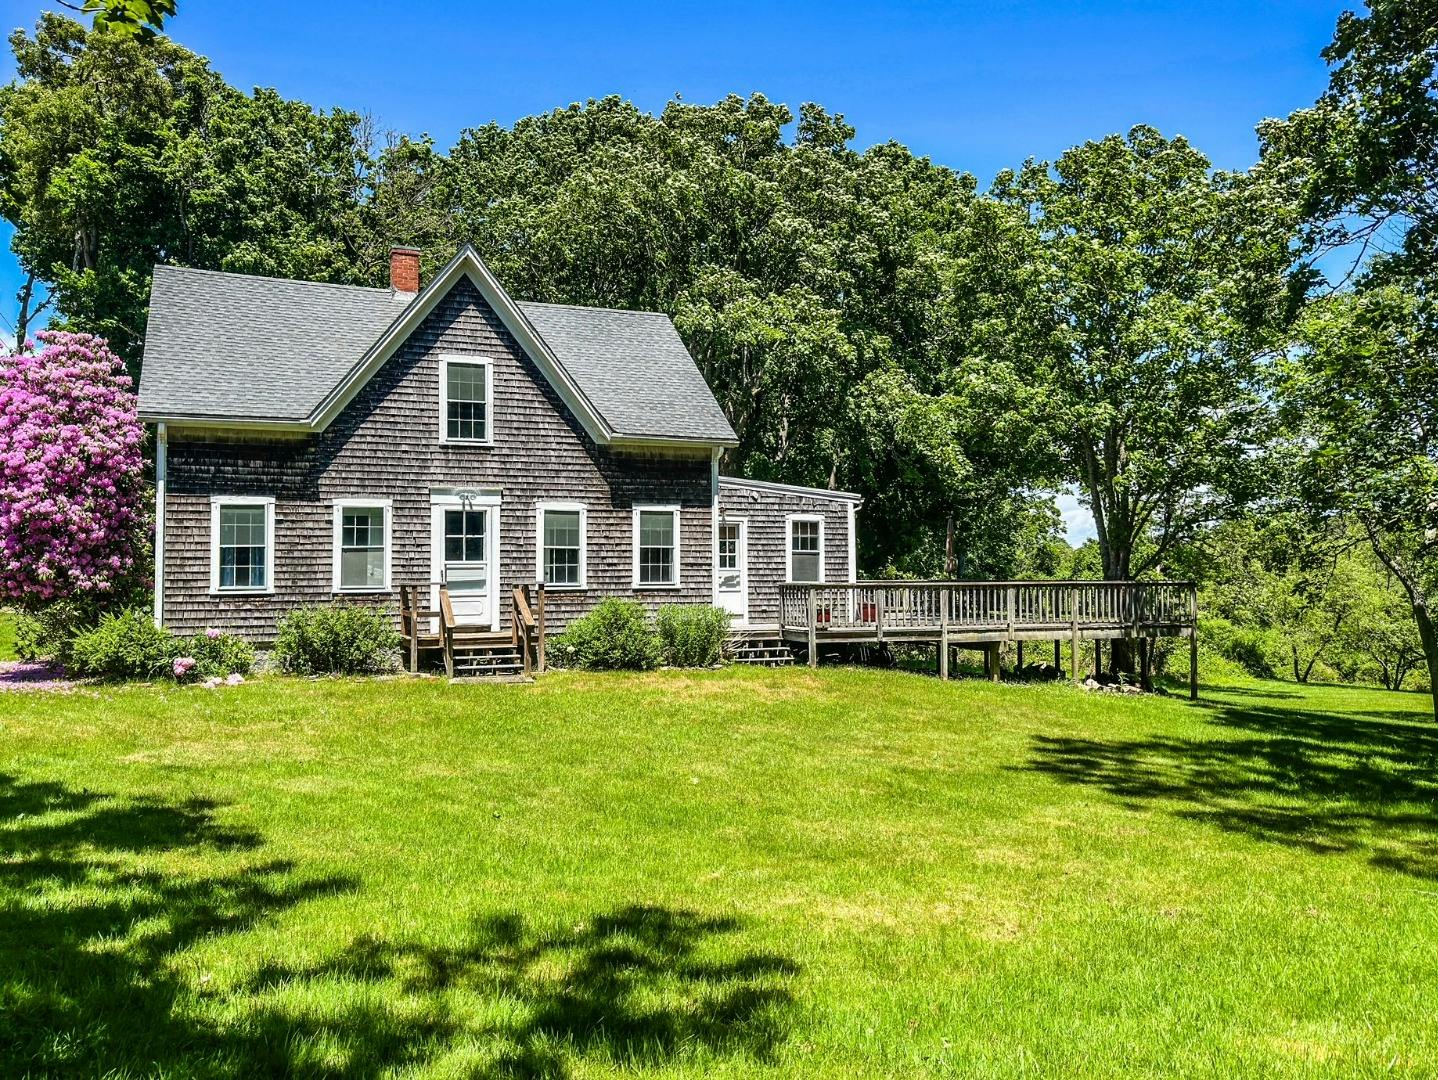 986-state-road-west-tisbury-ma-02575-42057